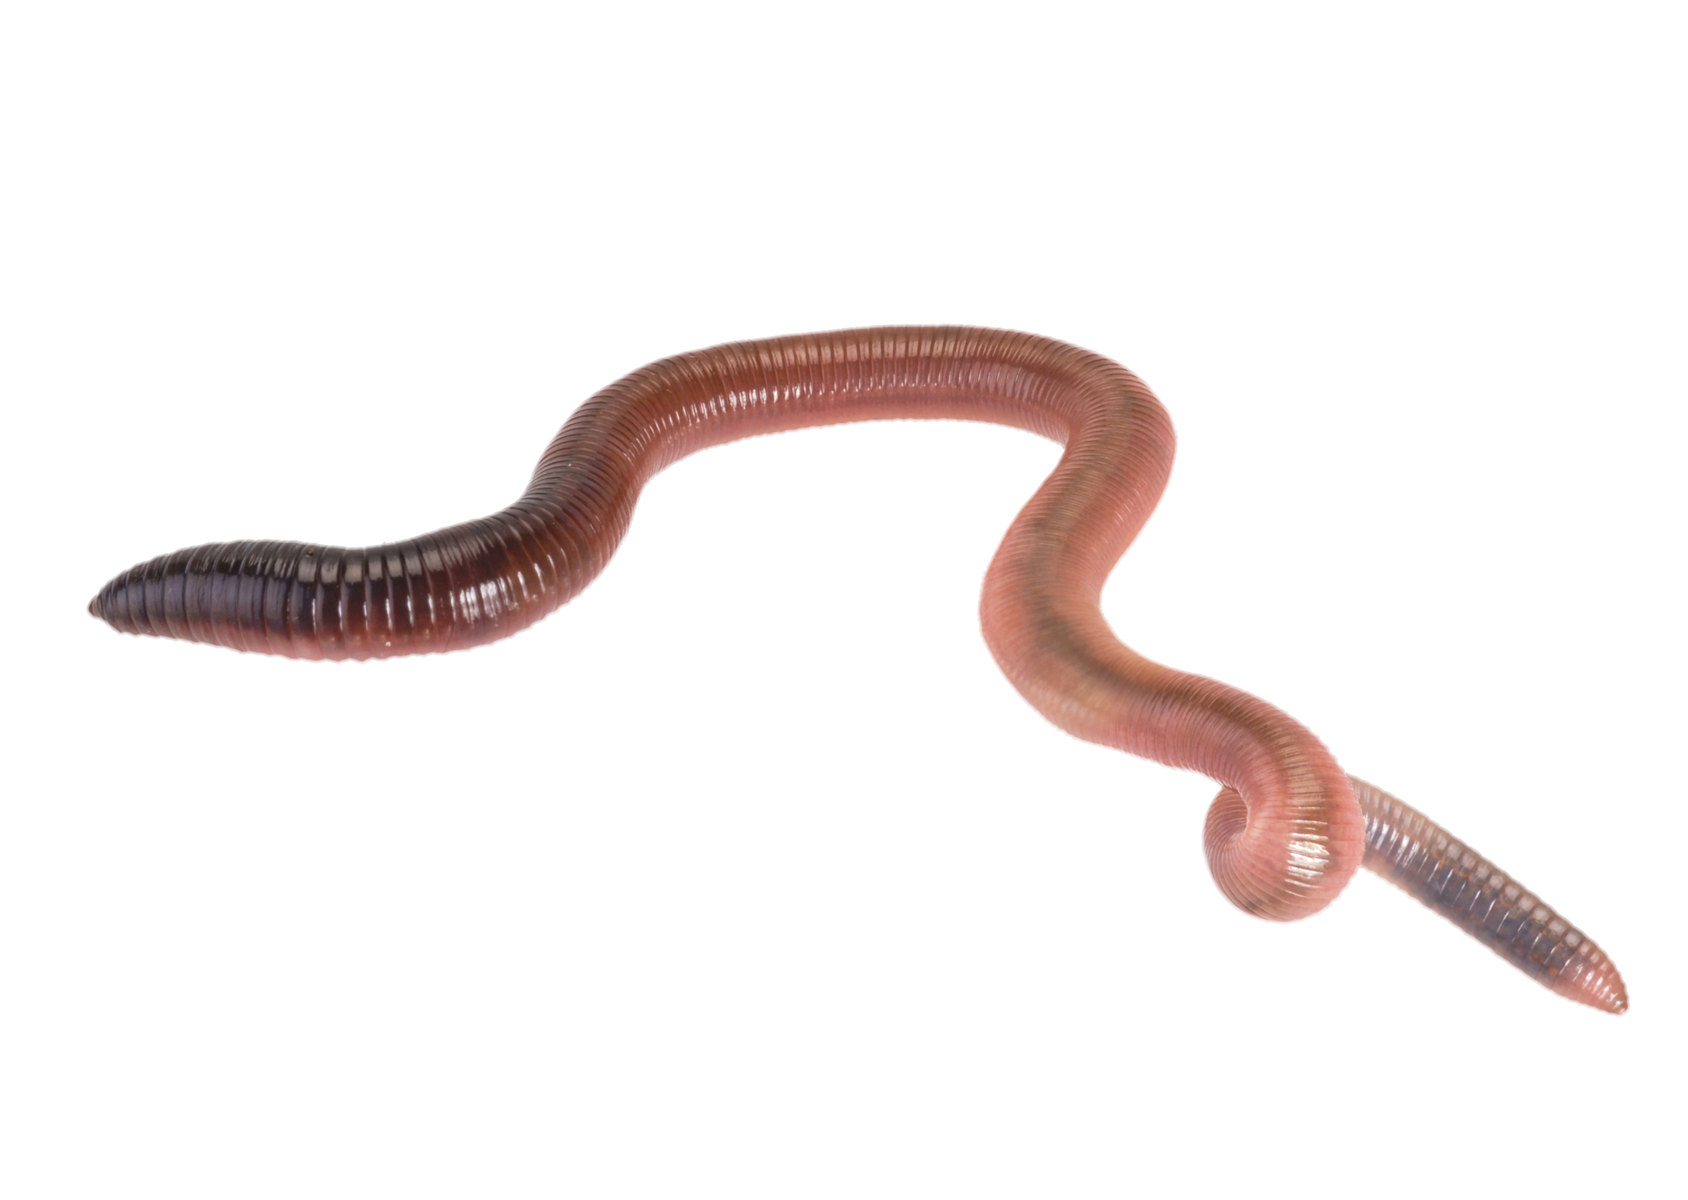 Worms png images free. Worm clipart soil organism